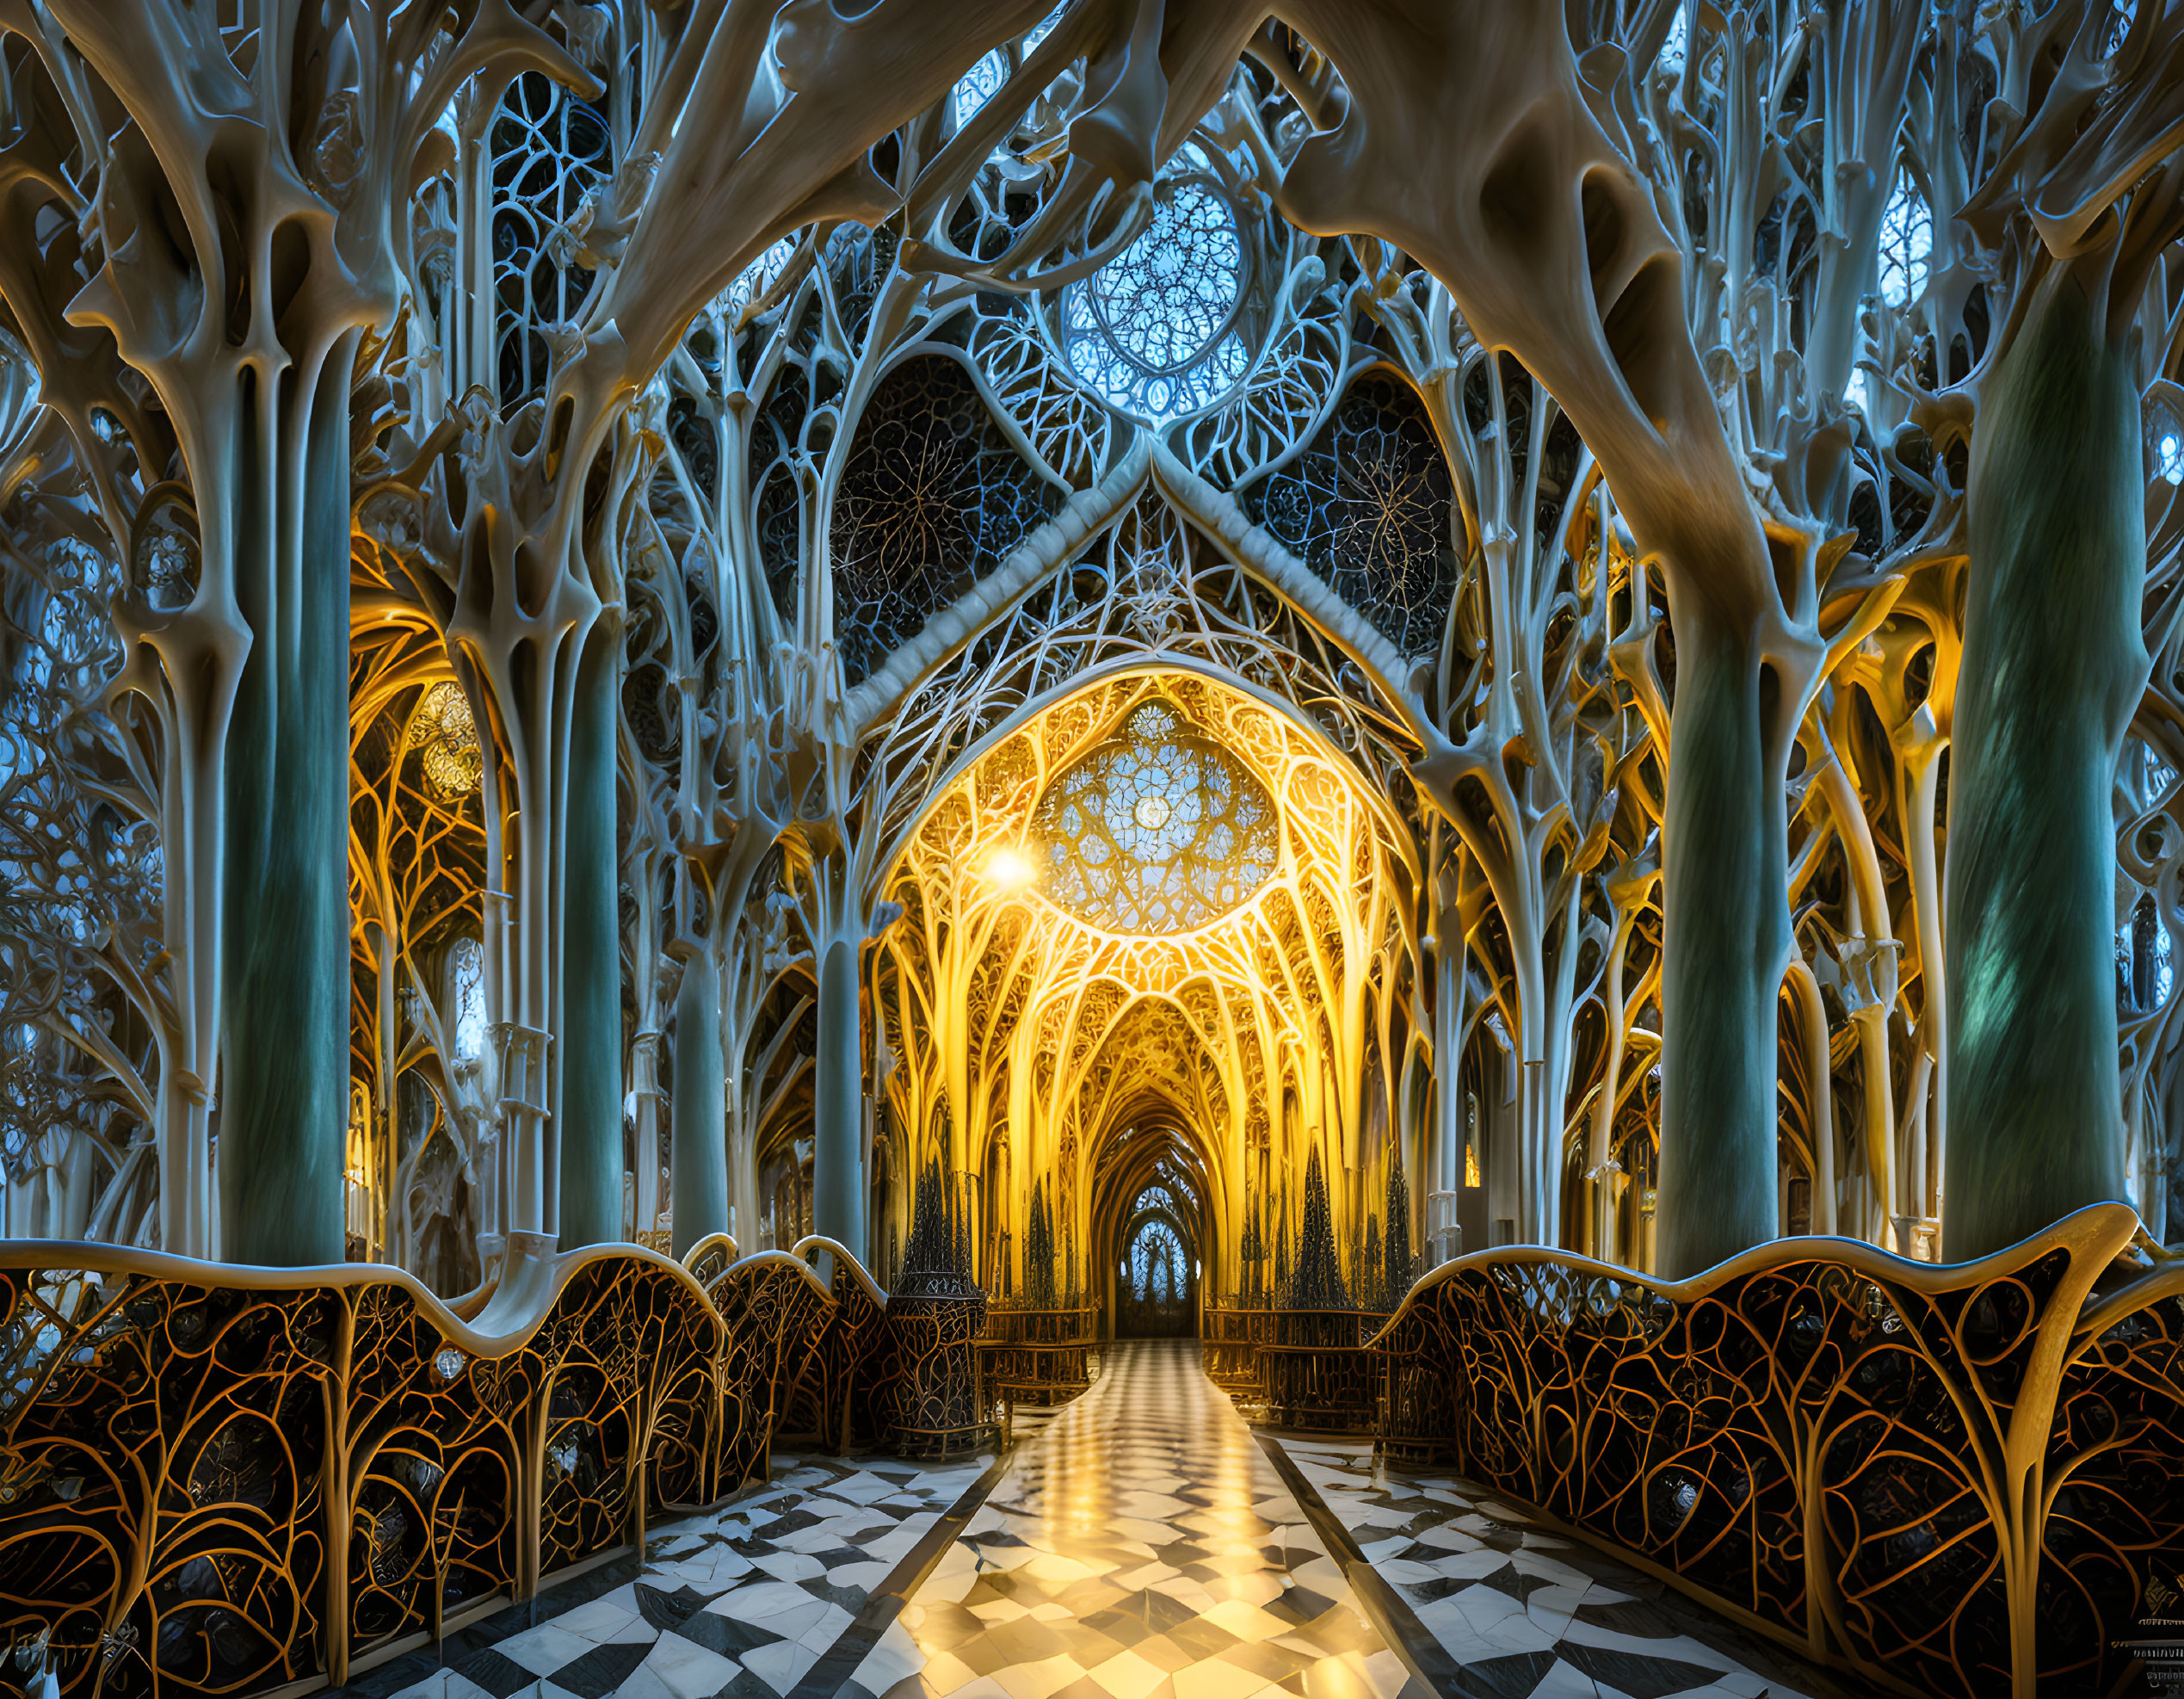 The Cathedral of Bones